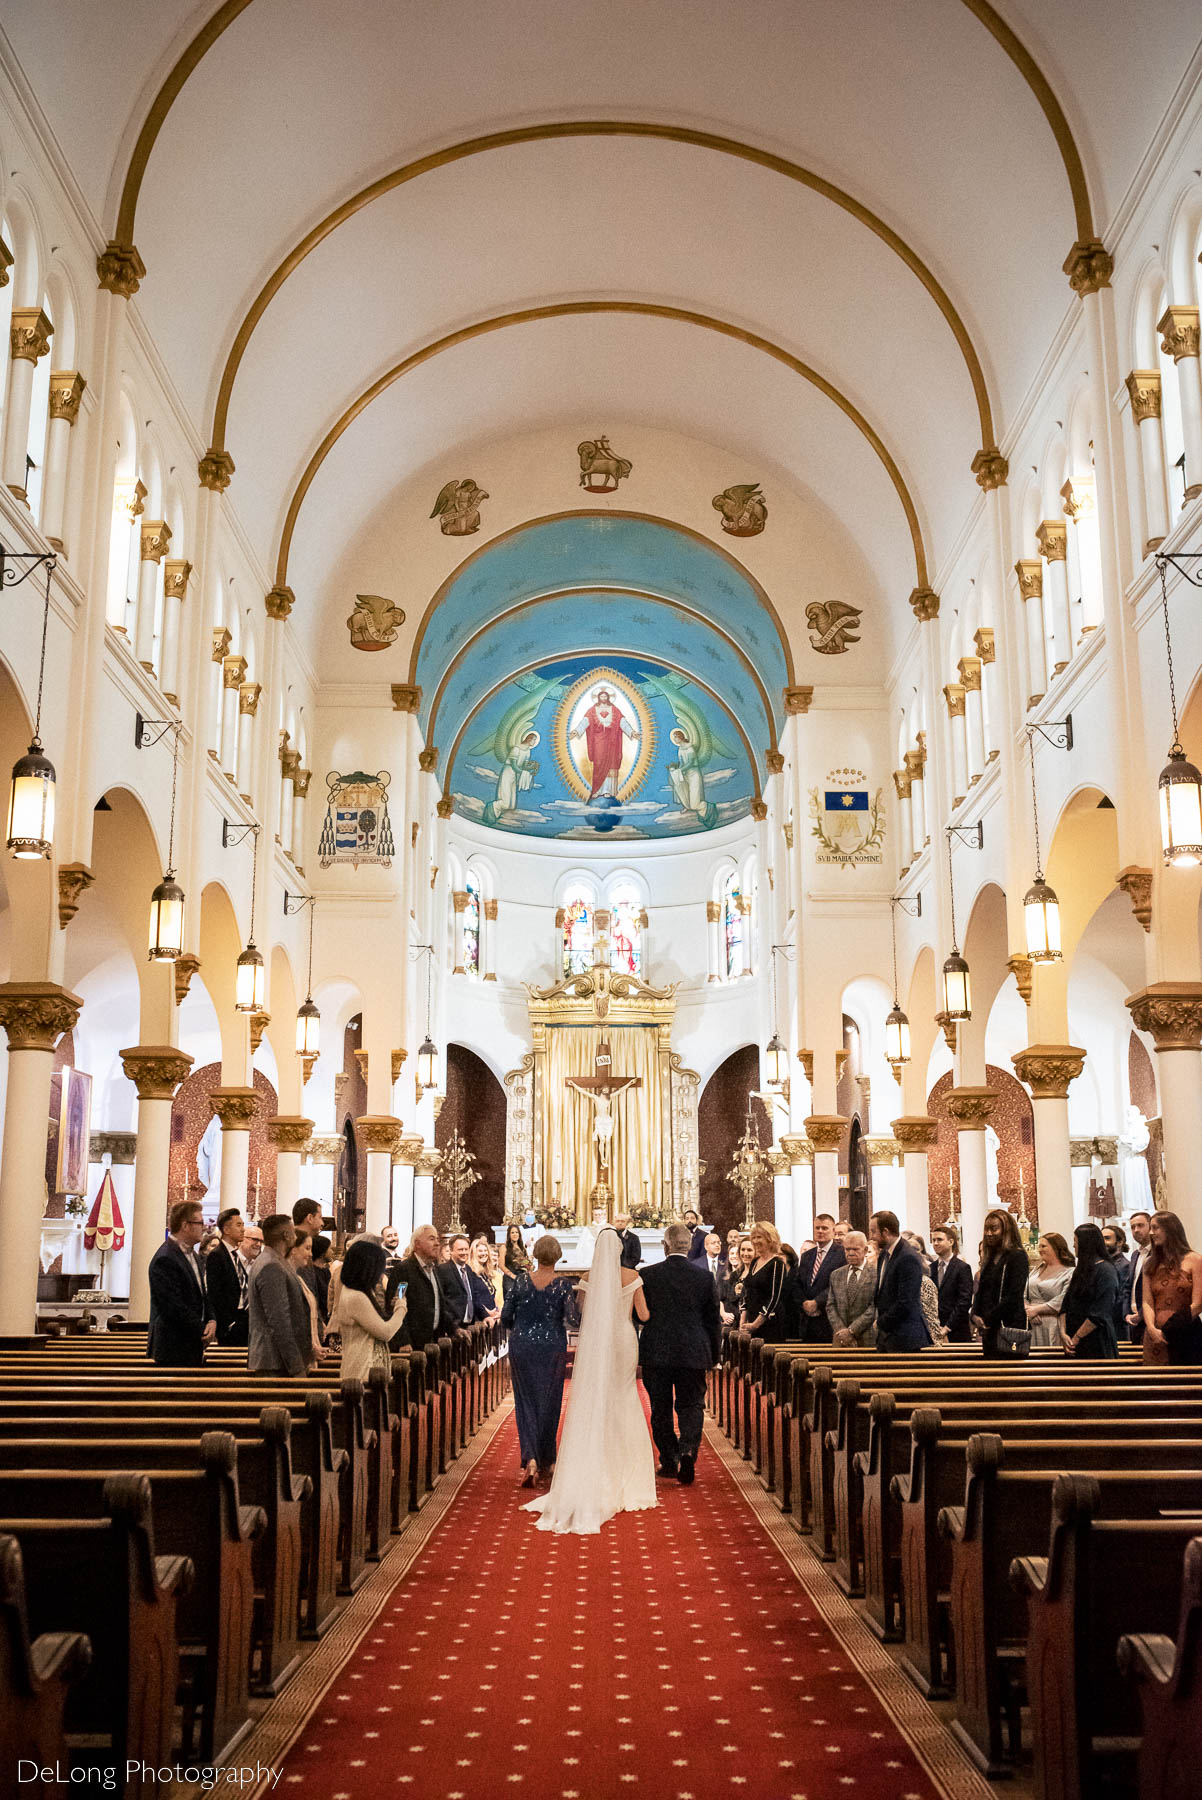 A portrait of a bride being walked down the aisle by her parents showing the expanse and ceiling details inside the church at the Basilica of the Sacred Heart of Jesus in Atlanta, GA by Charlotte wedding photographers DeLong Photography 